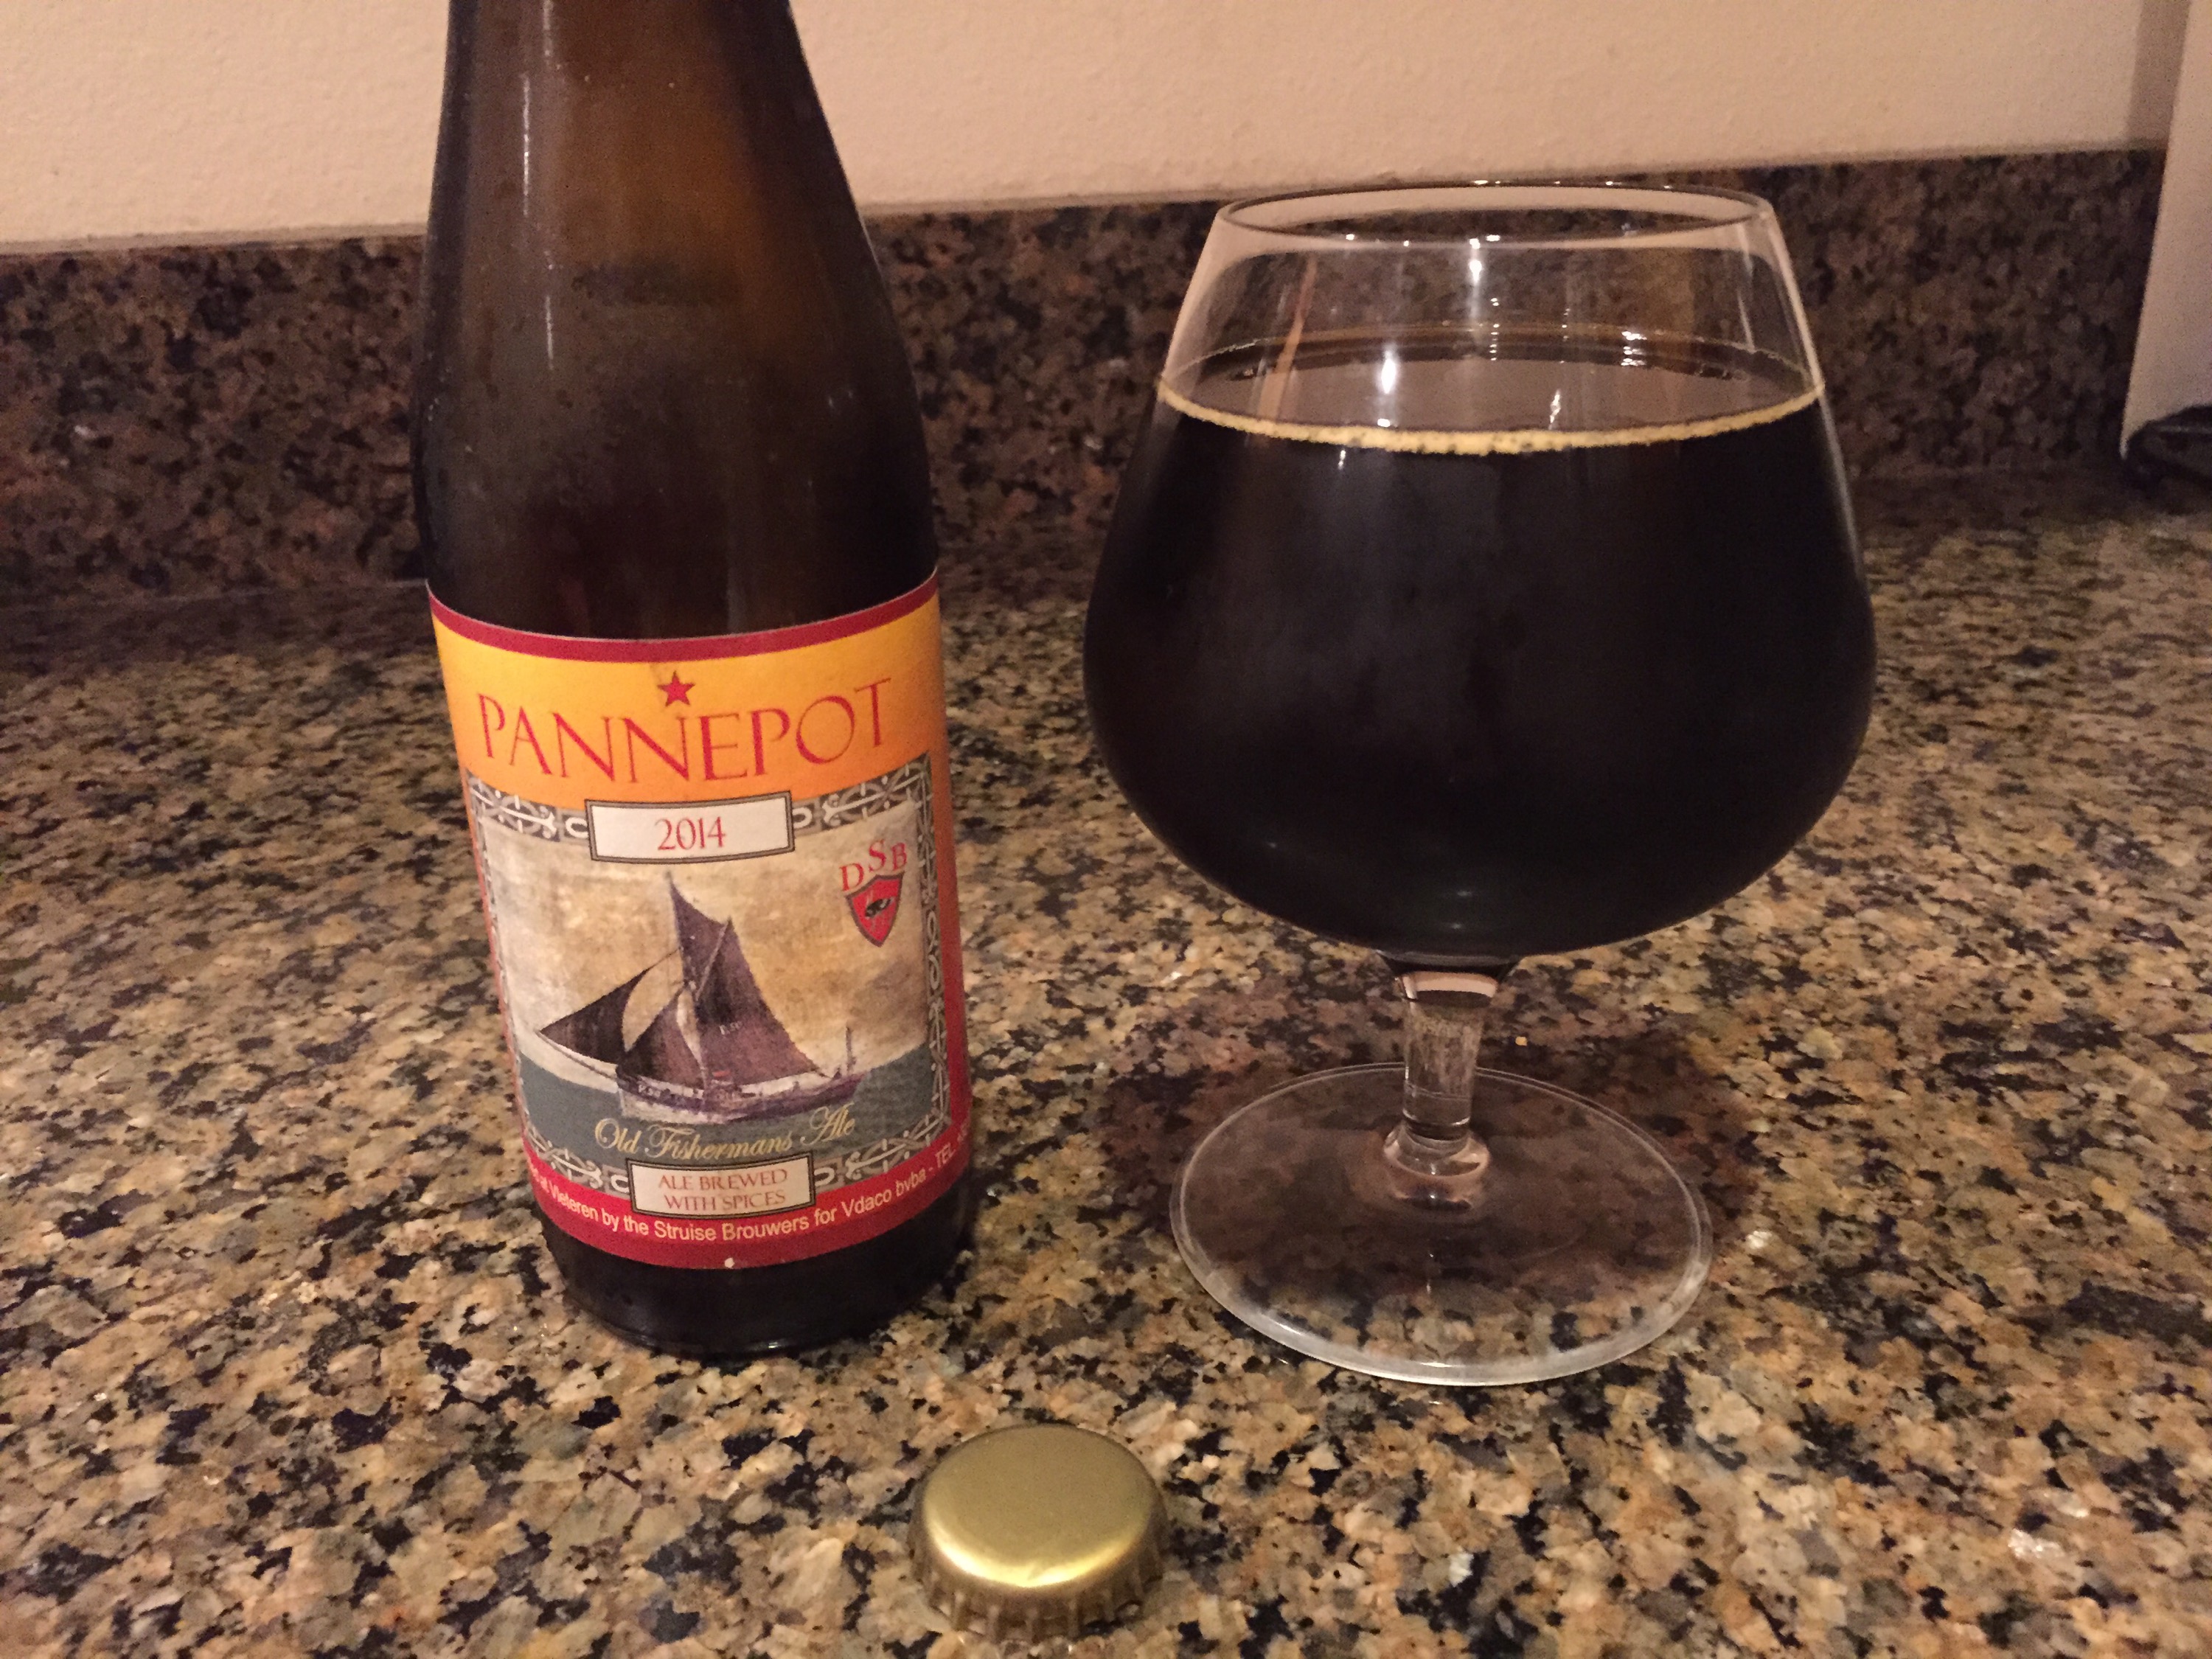 Pannepot – Old Fishermans Ale – 2014 by De Struise Brouwers